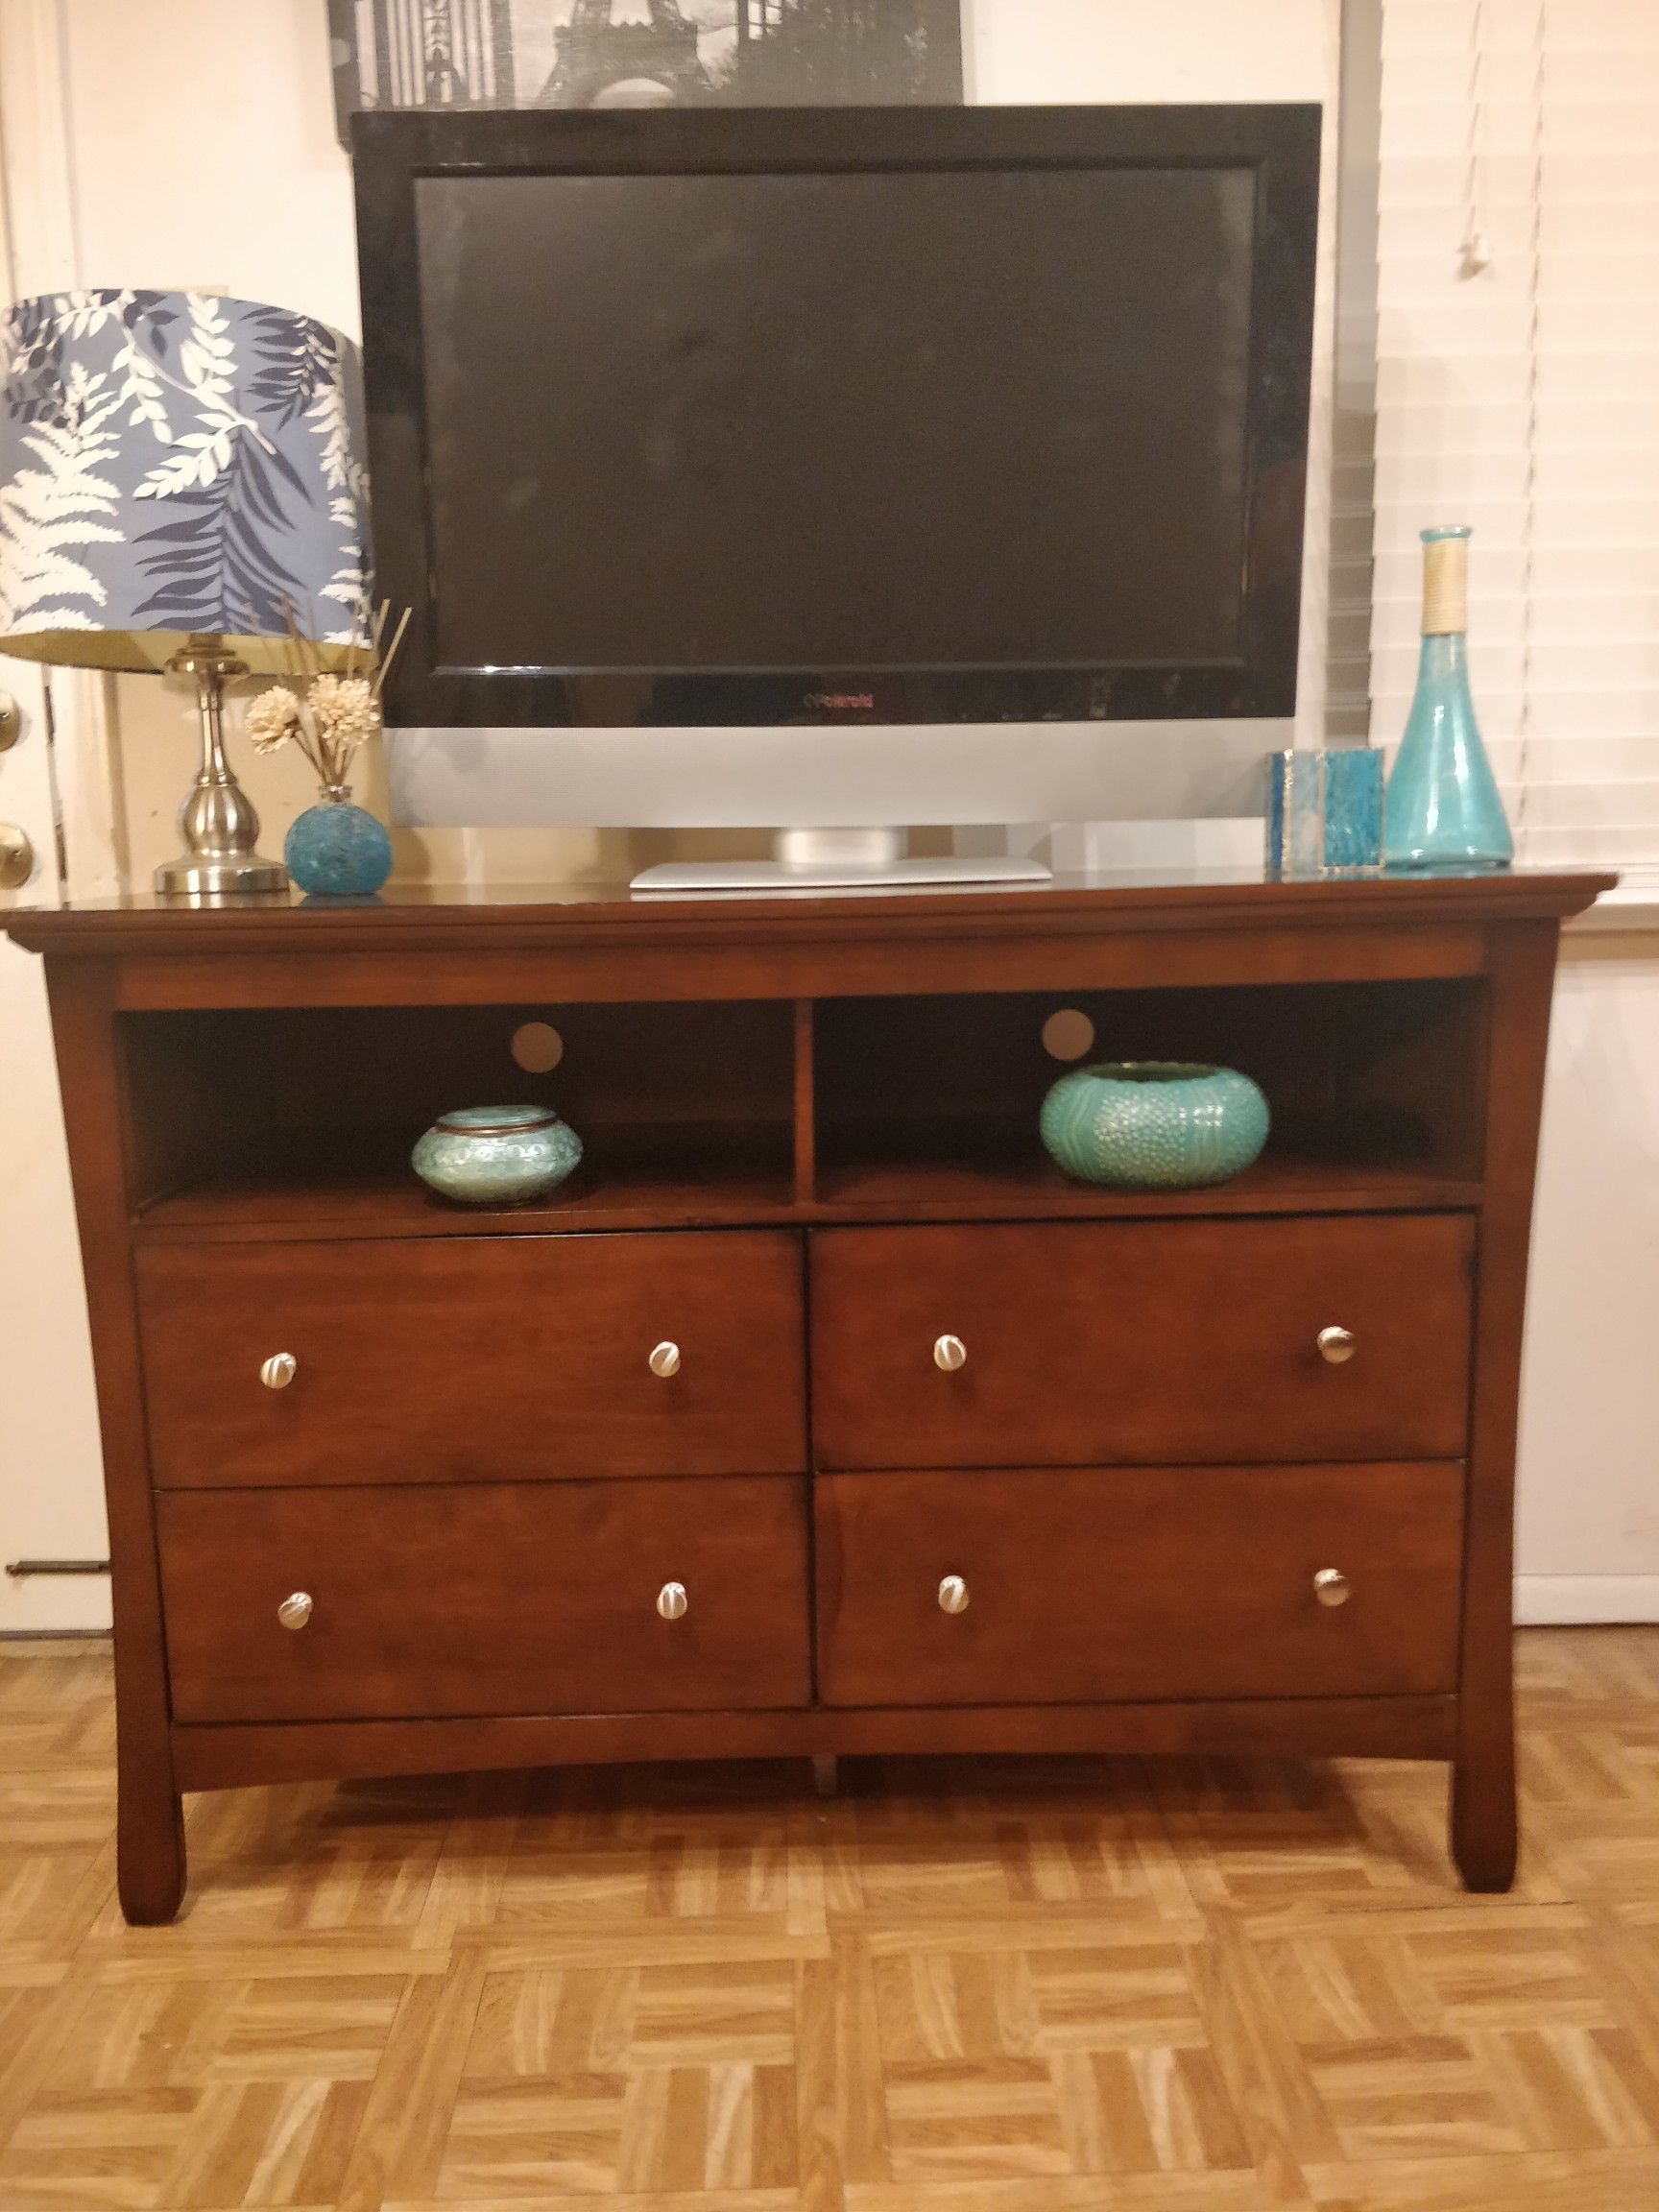 Like New dresser/ TV stand for big TVs in great condition, all drawers sliding smoothly, pet free smoke free. L48"*W18"*H33"